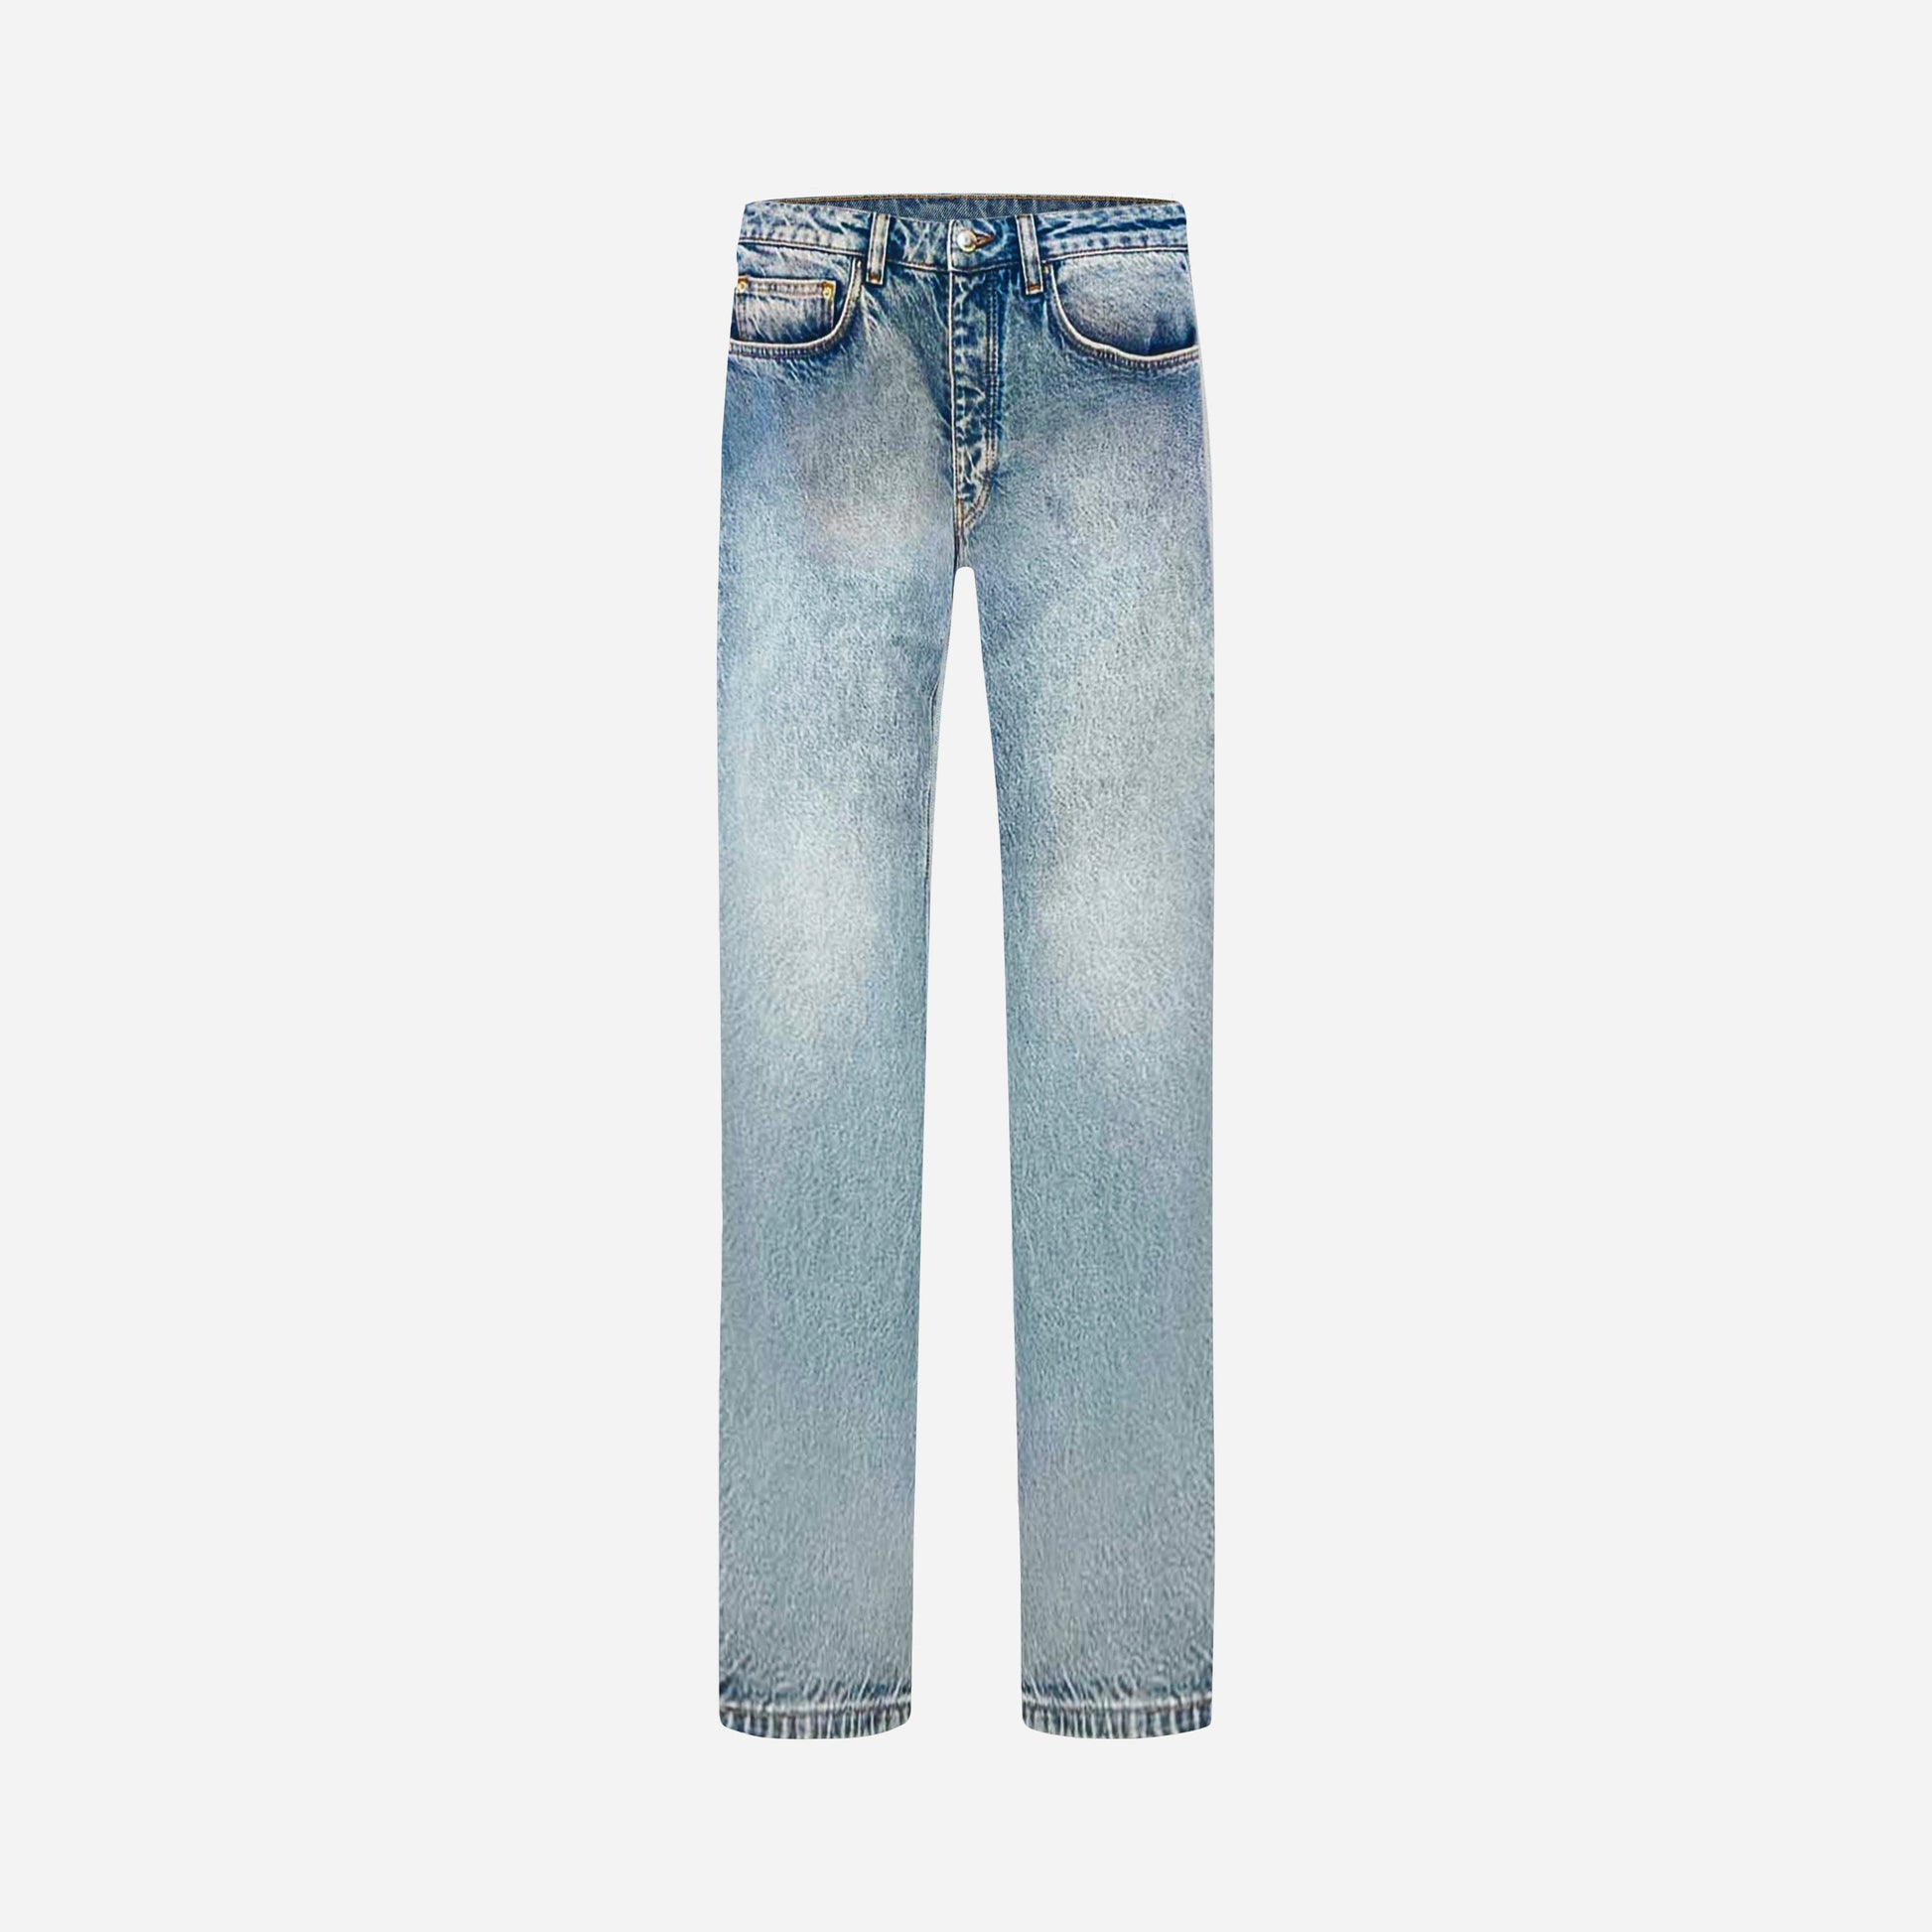 Straight Jeans in Acid Washed Blue Denim